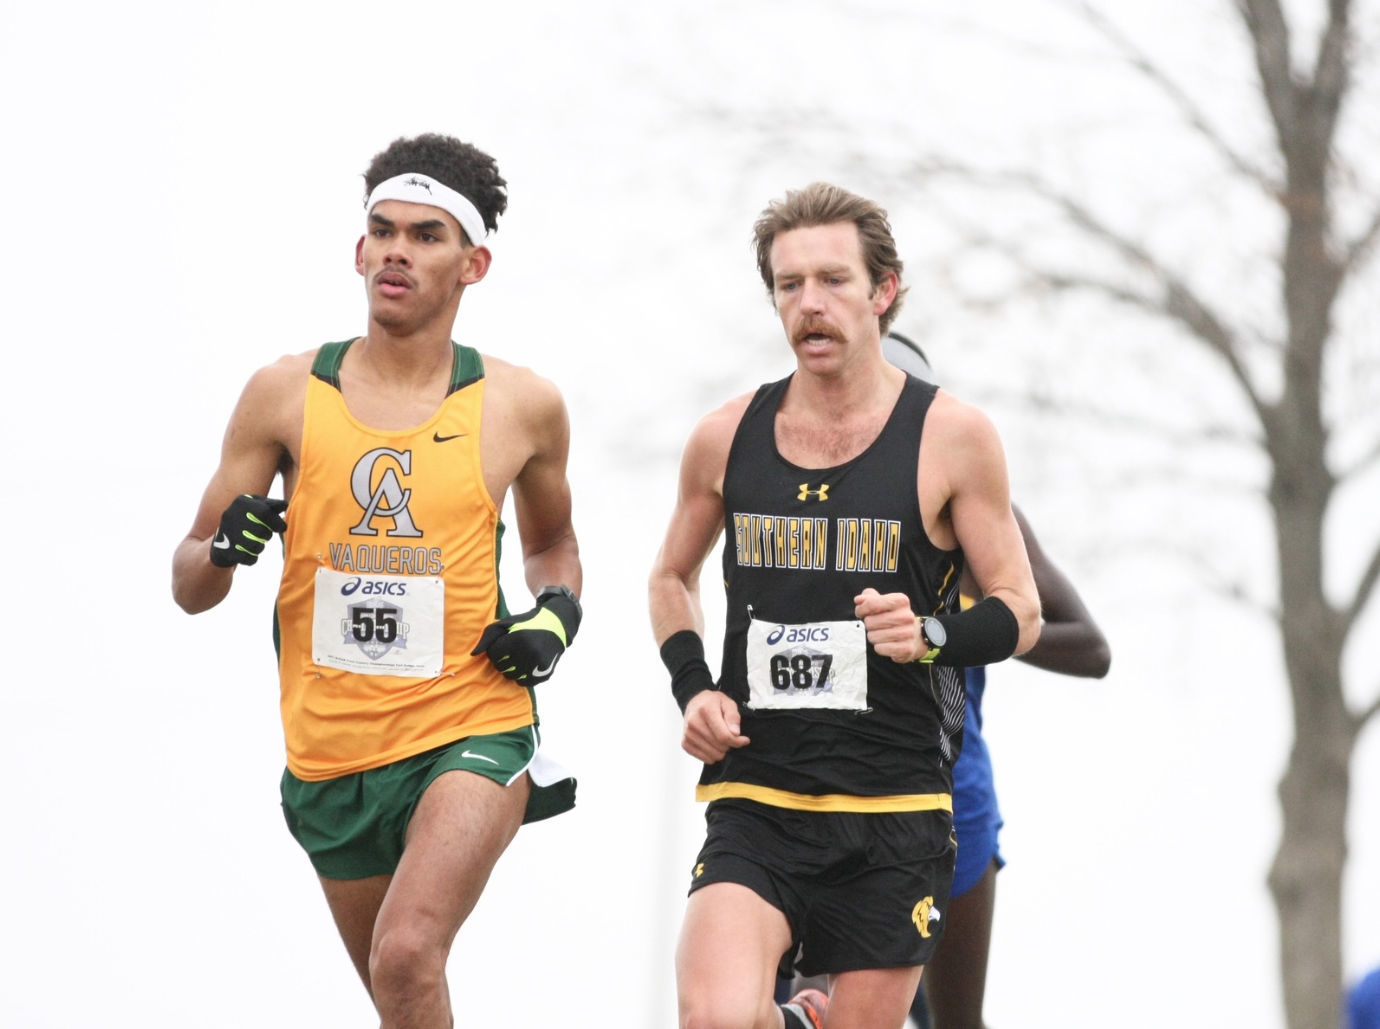 CAC Cross Country reloads at a run for more titles